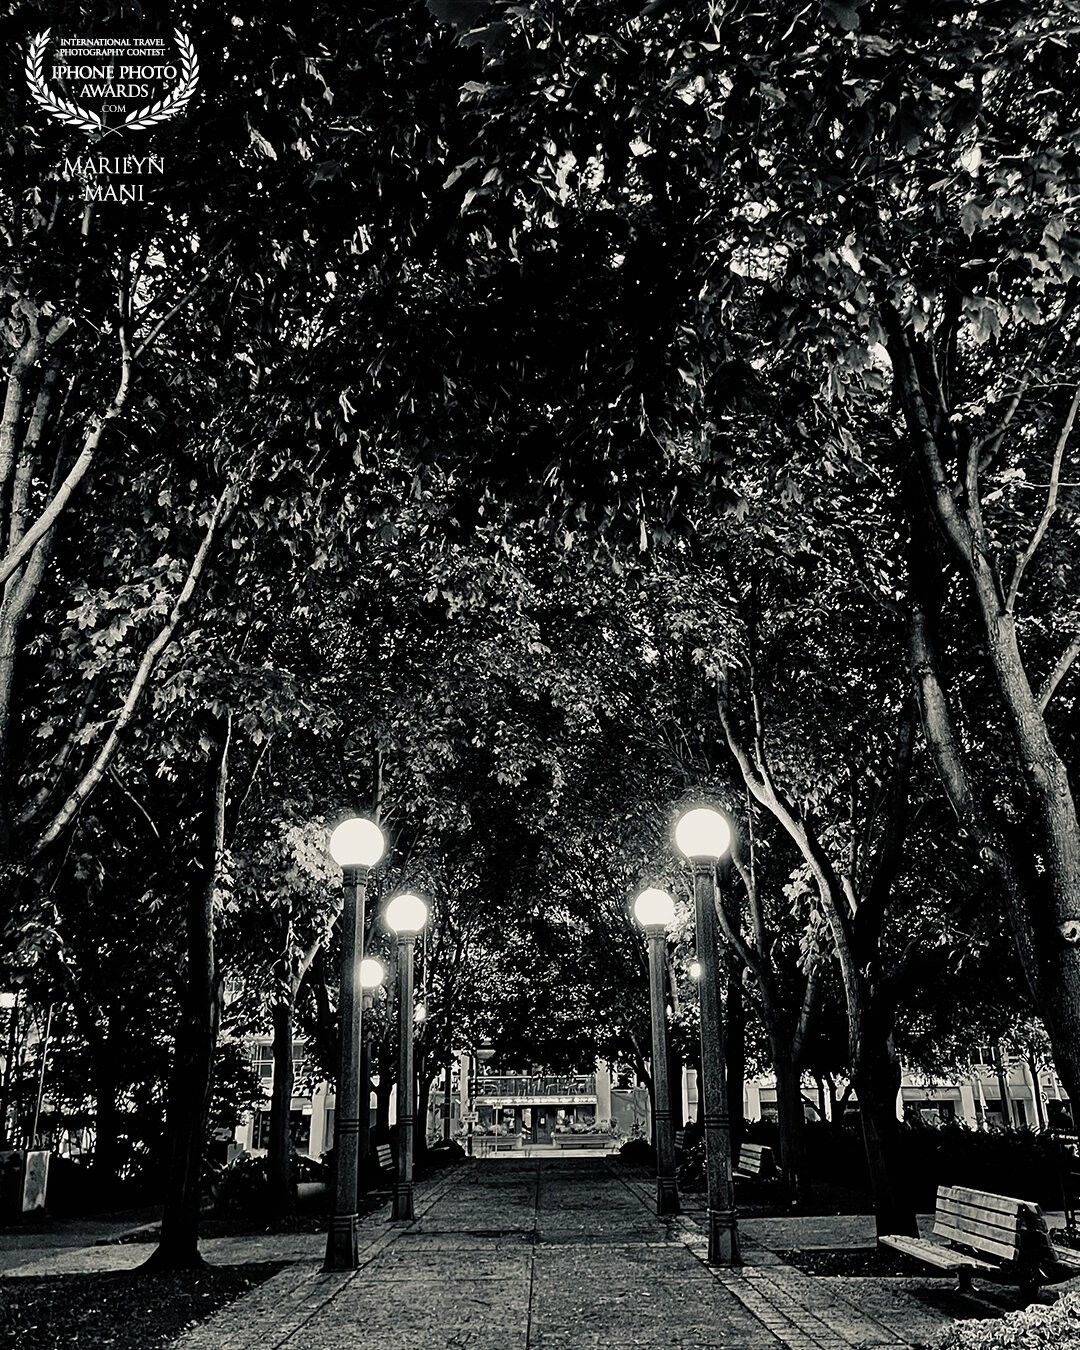 You don’t need a 100 elements to make the perfect scenery - trees (nature’s gift) and some dim lights make for the most subtle and beautiful moment even amidst the urban jungle! Shot here at Music Garden, Harbourfront, Toronto.